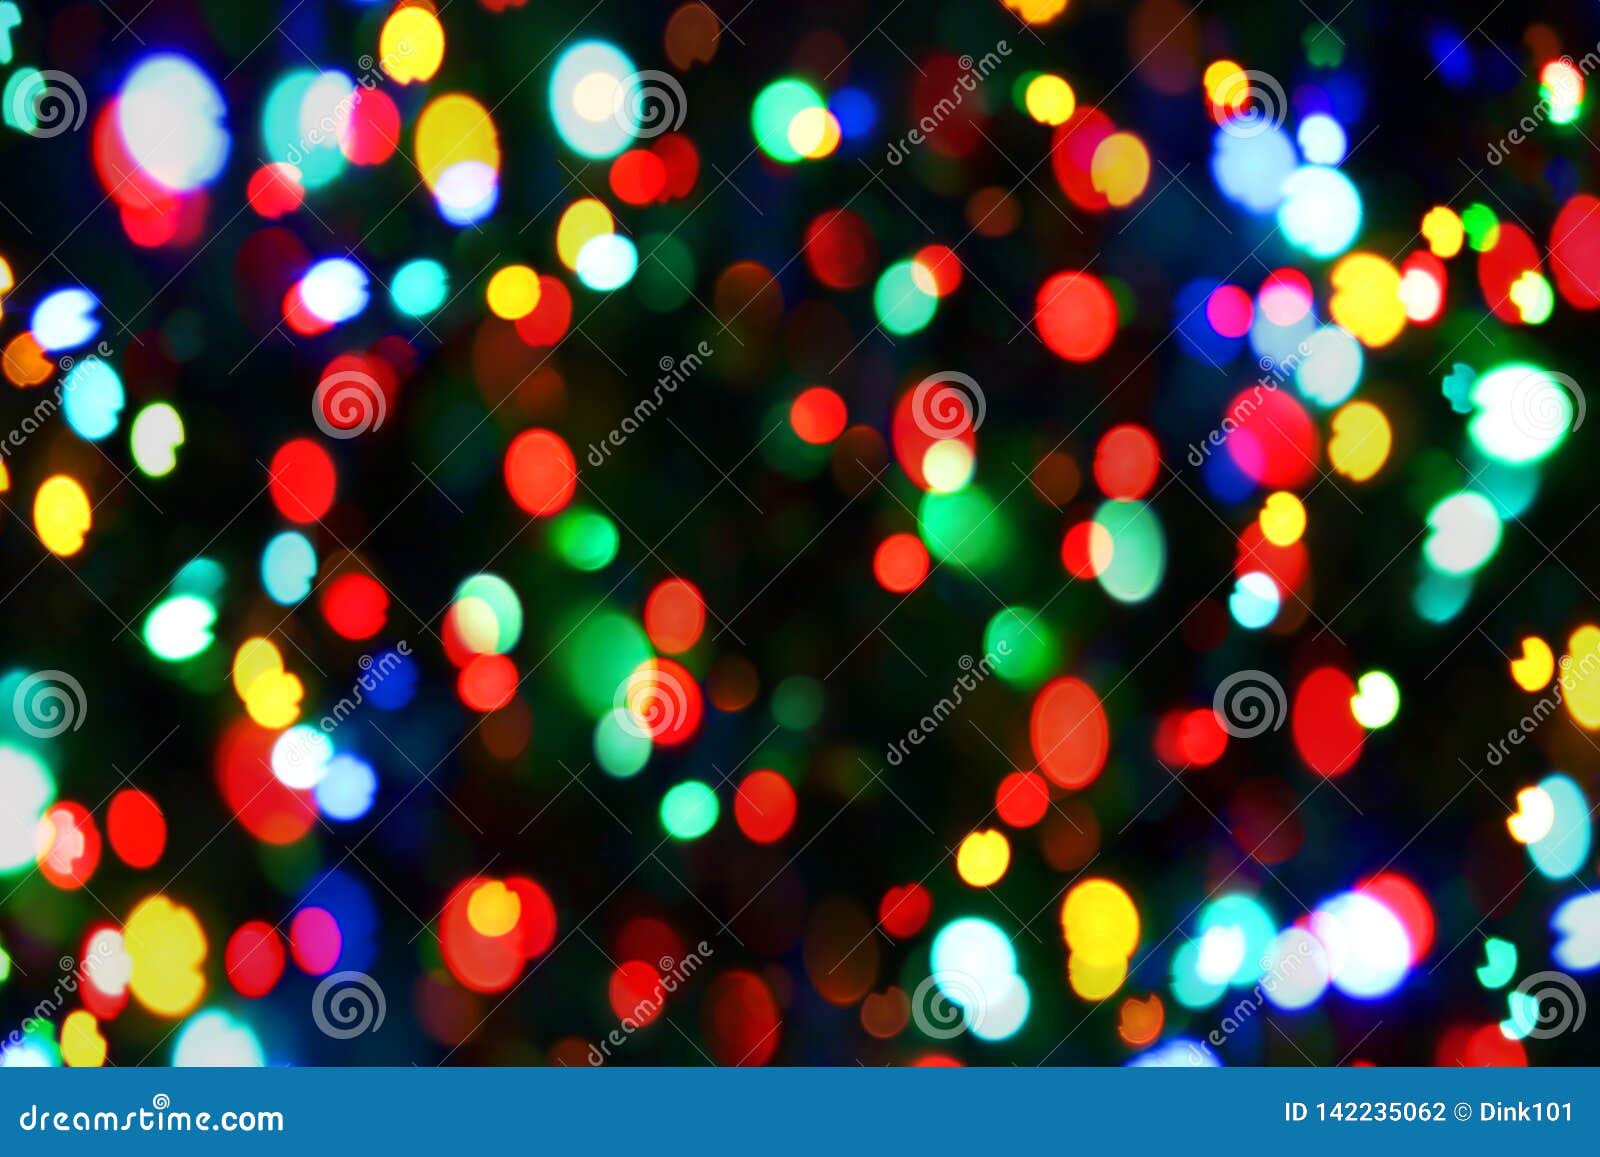 Holiday Color Unfocused Lights Stock Photo - Image of multicolor ...